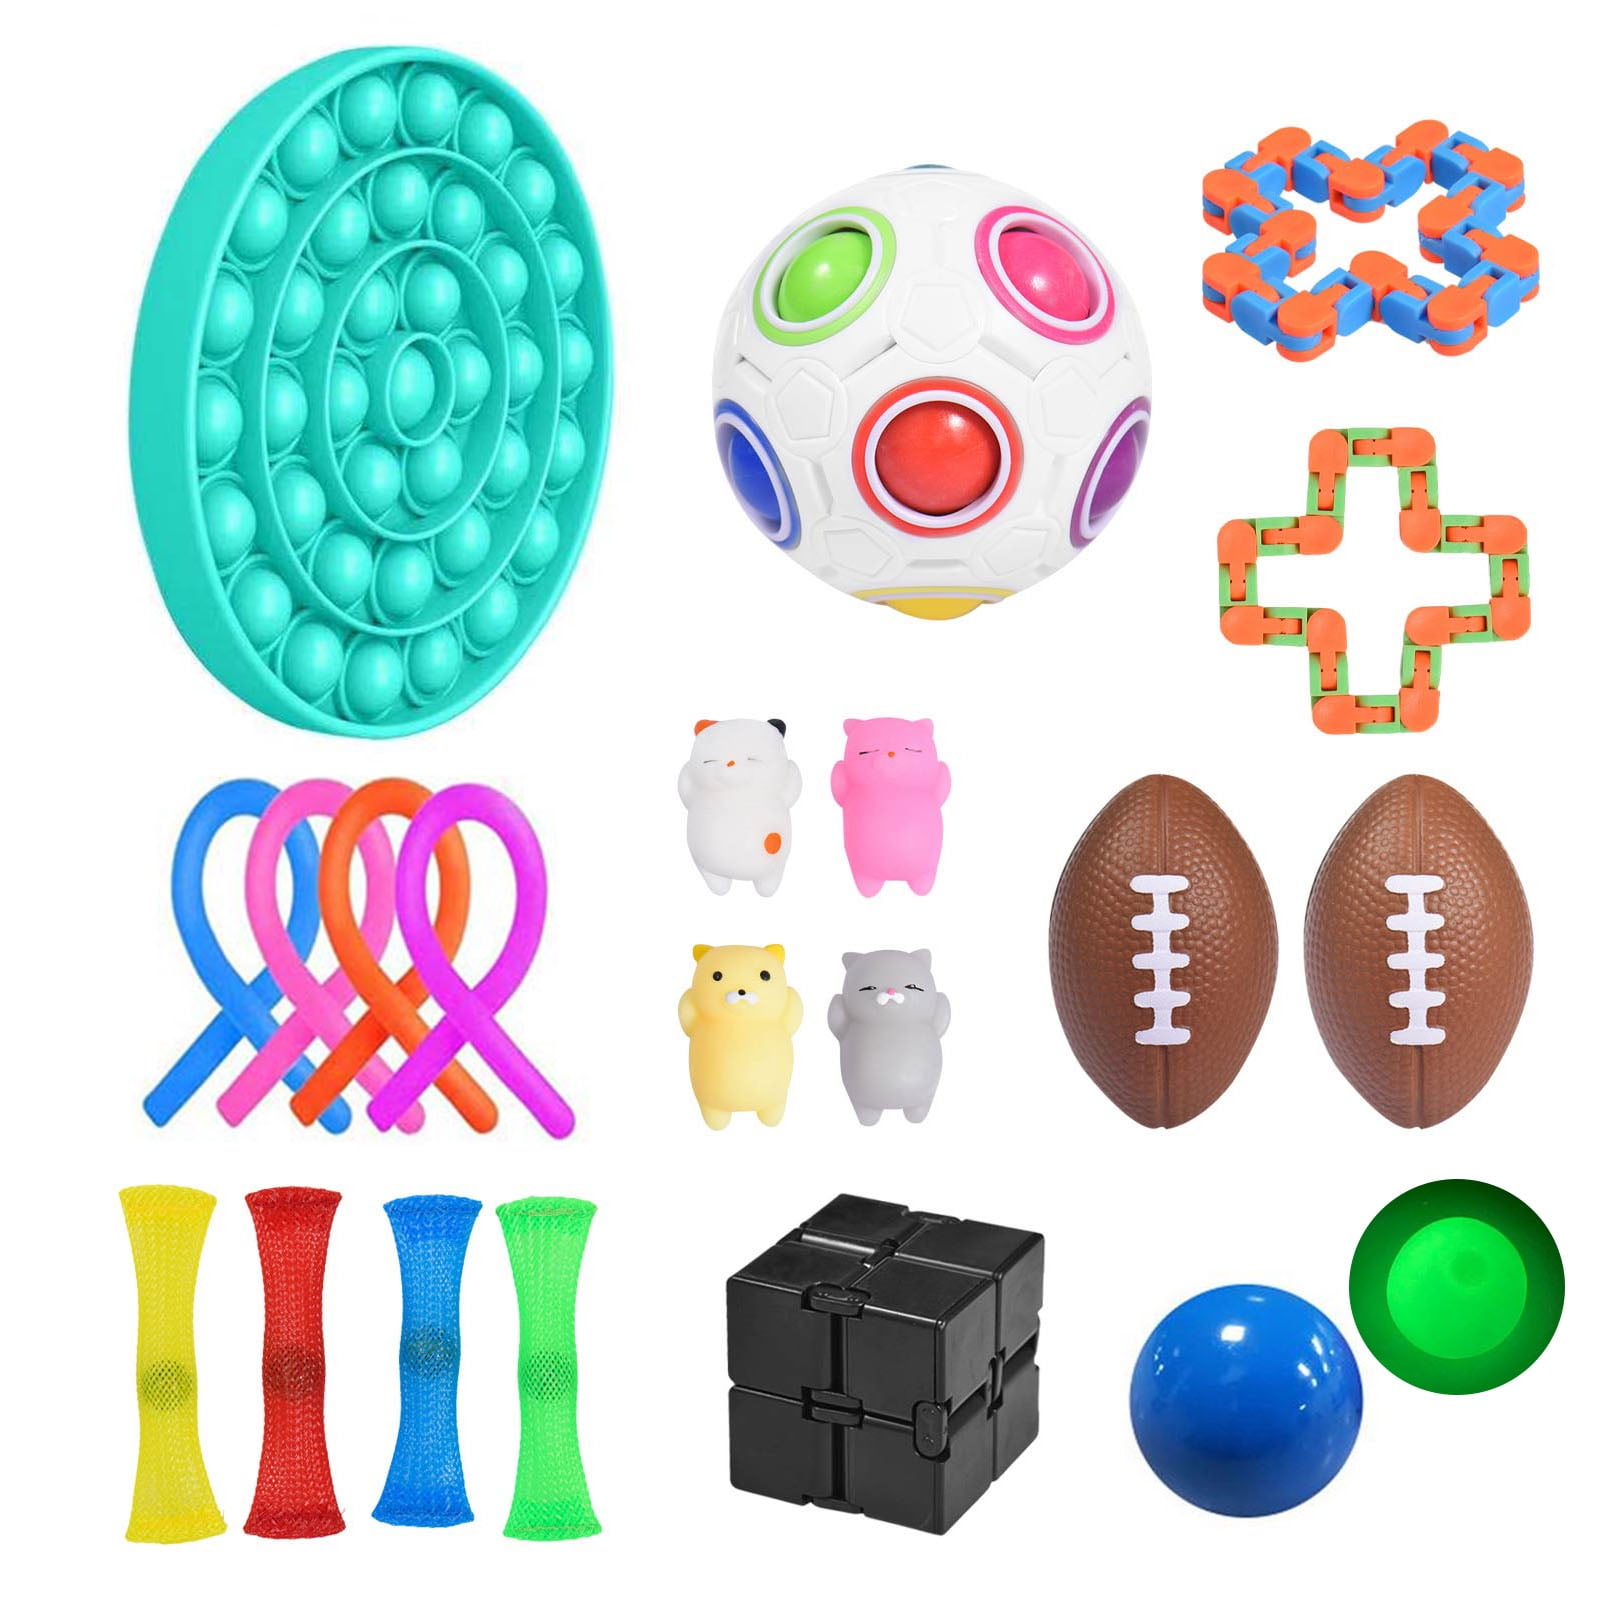 Details about   Autism ADHD Anxiety Therapy Toys Mesh & Marbles Ball Stress  Relief Fidget Gifts 